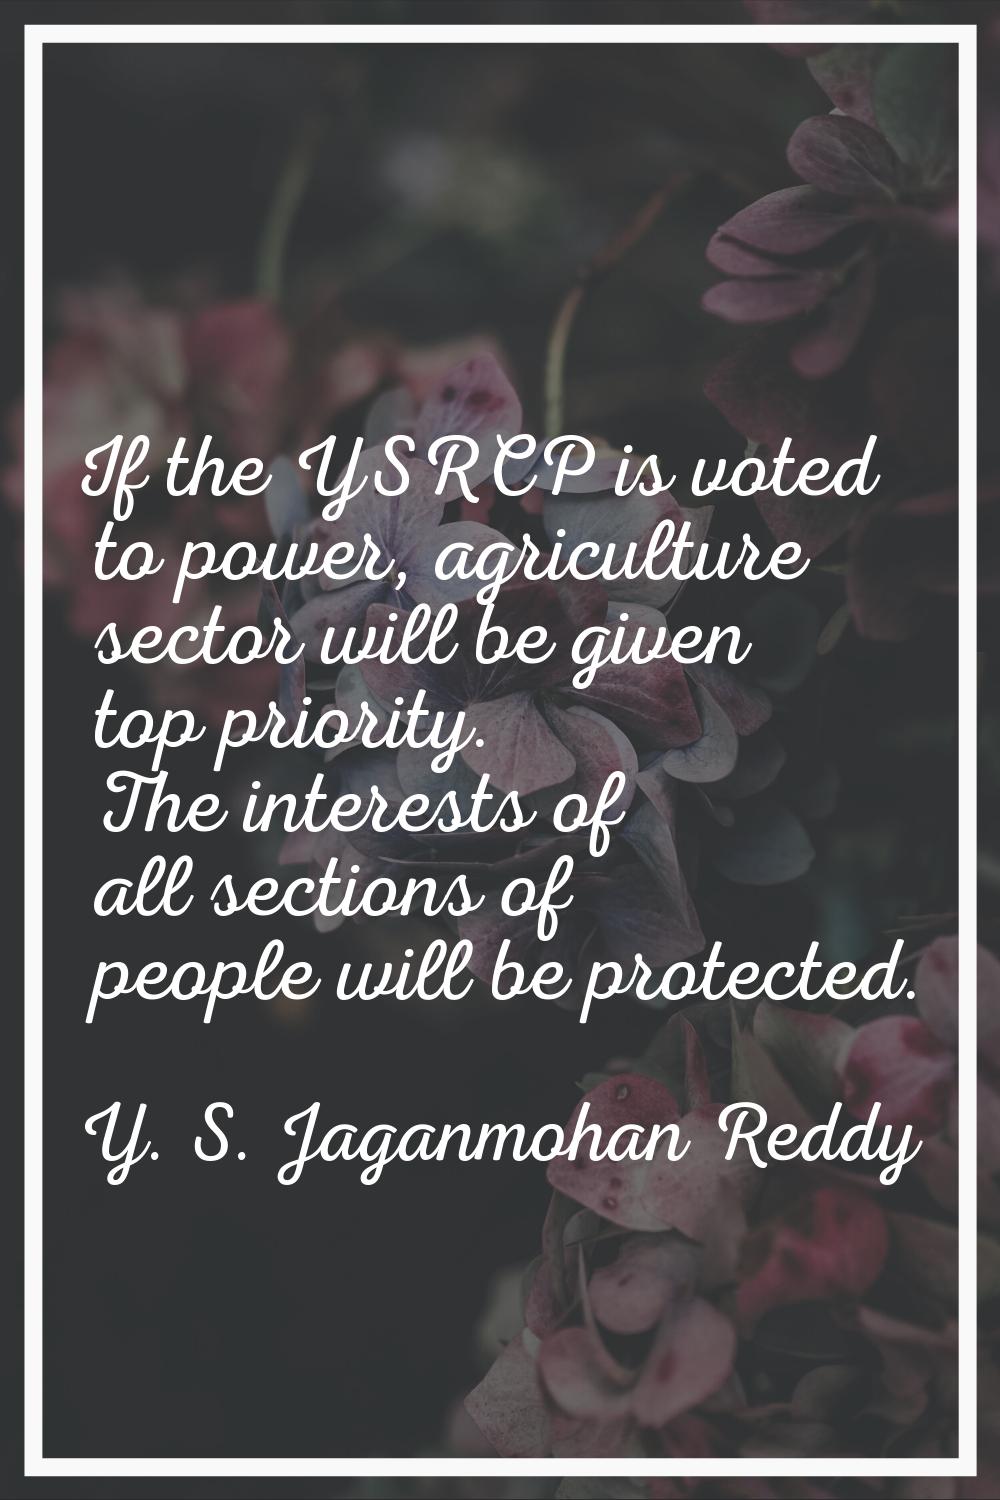 If the YSRCP is voted to power, agriculture sector will be given top priority. The interests of all